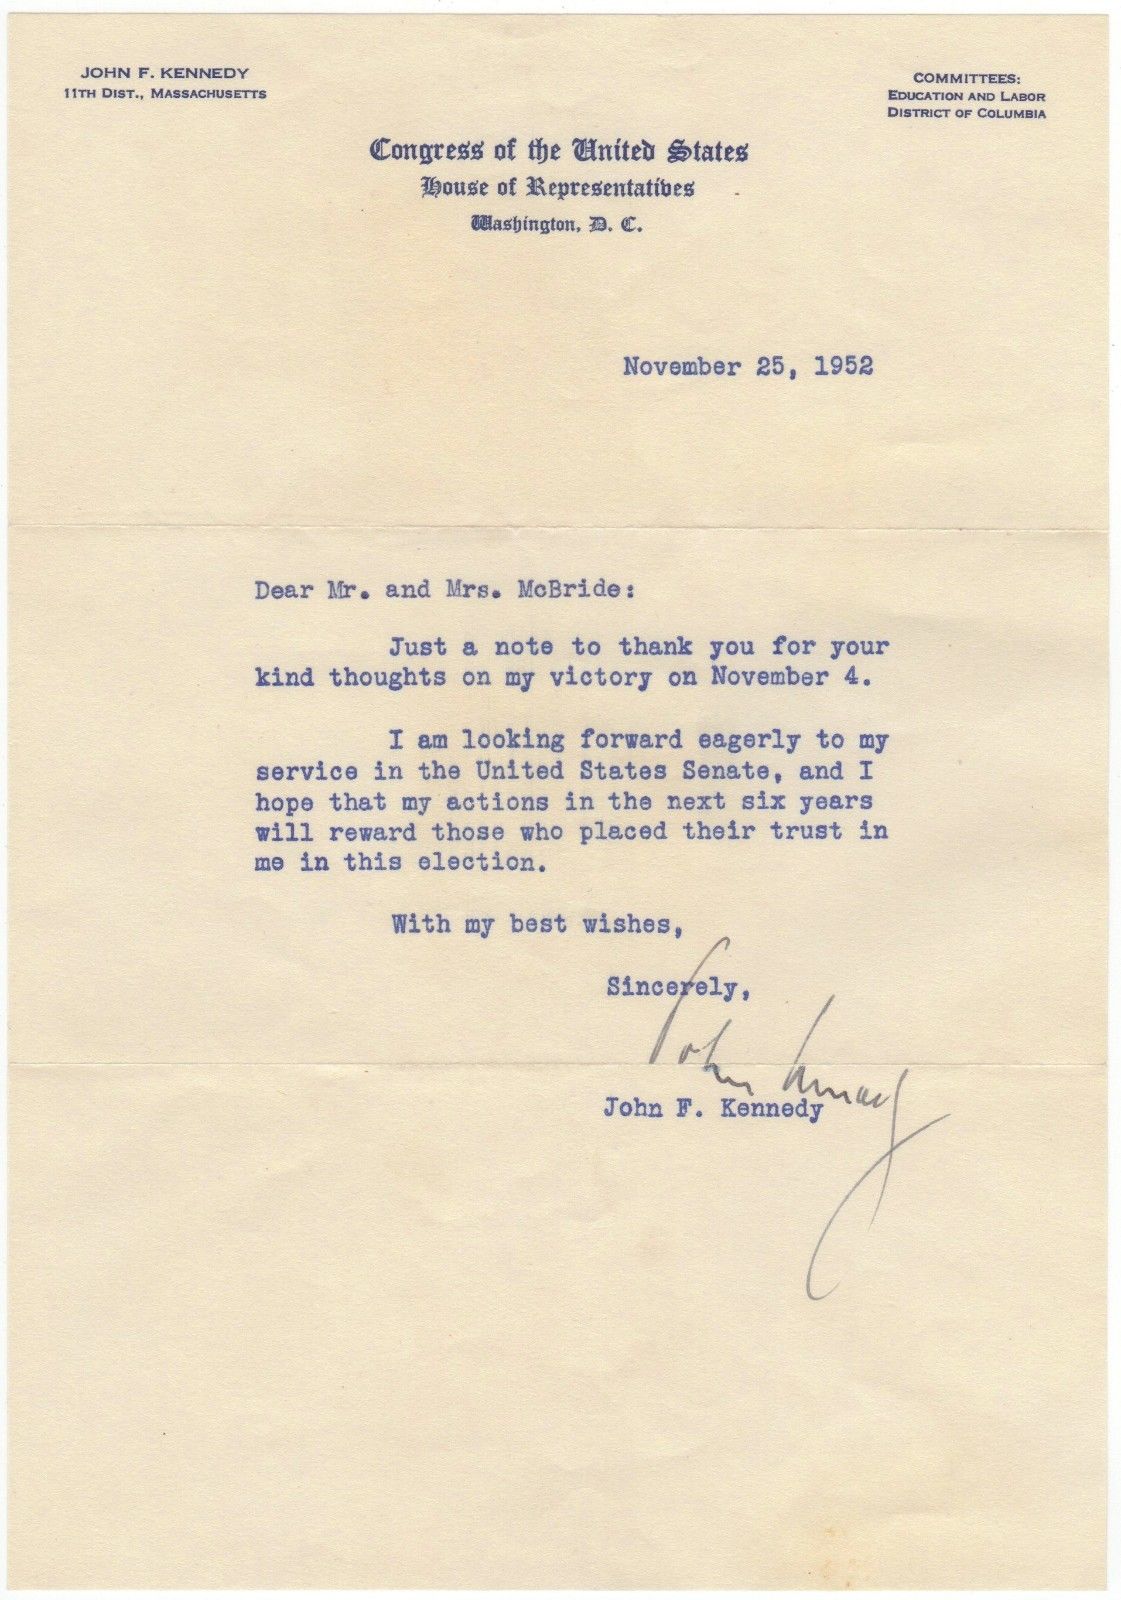 John F. Kennedy – typed letter signed “I am looking forward ...to my service..."